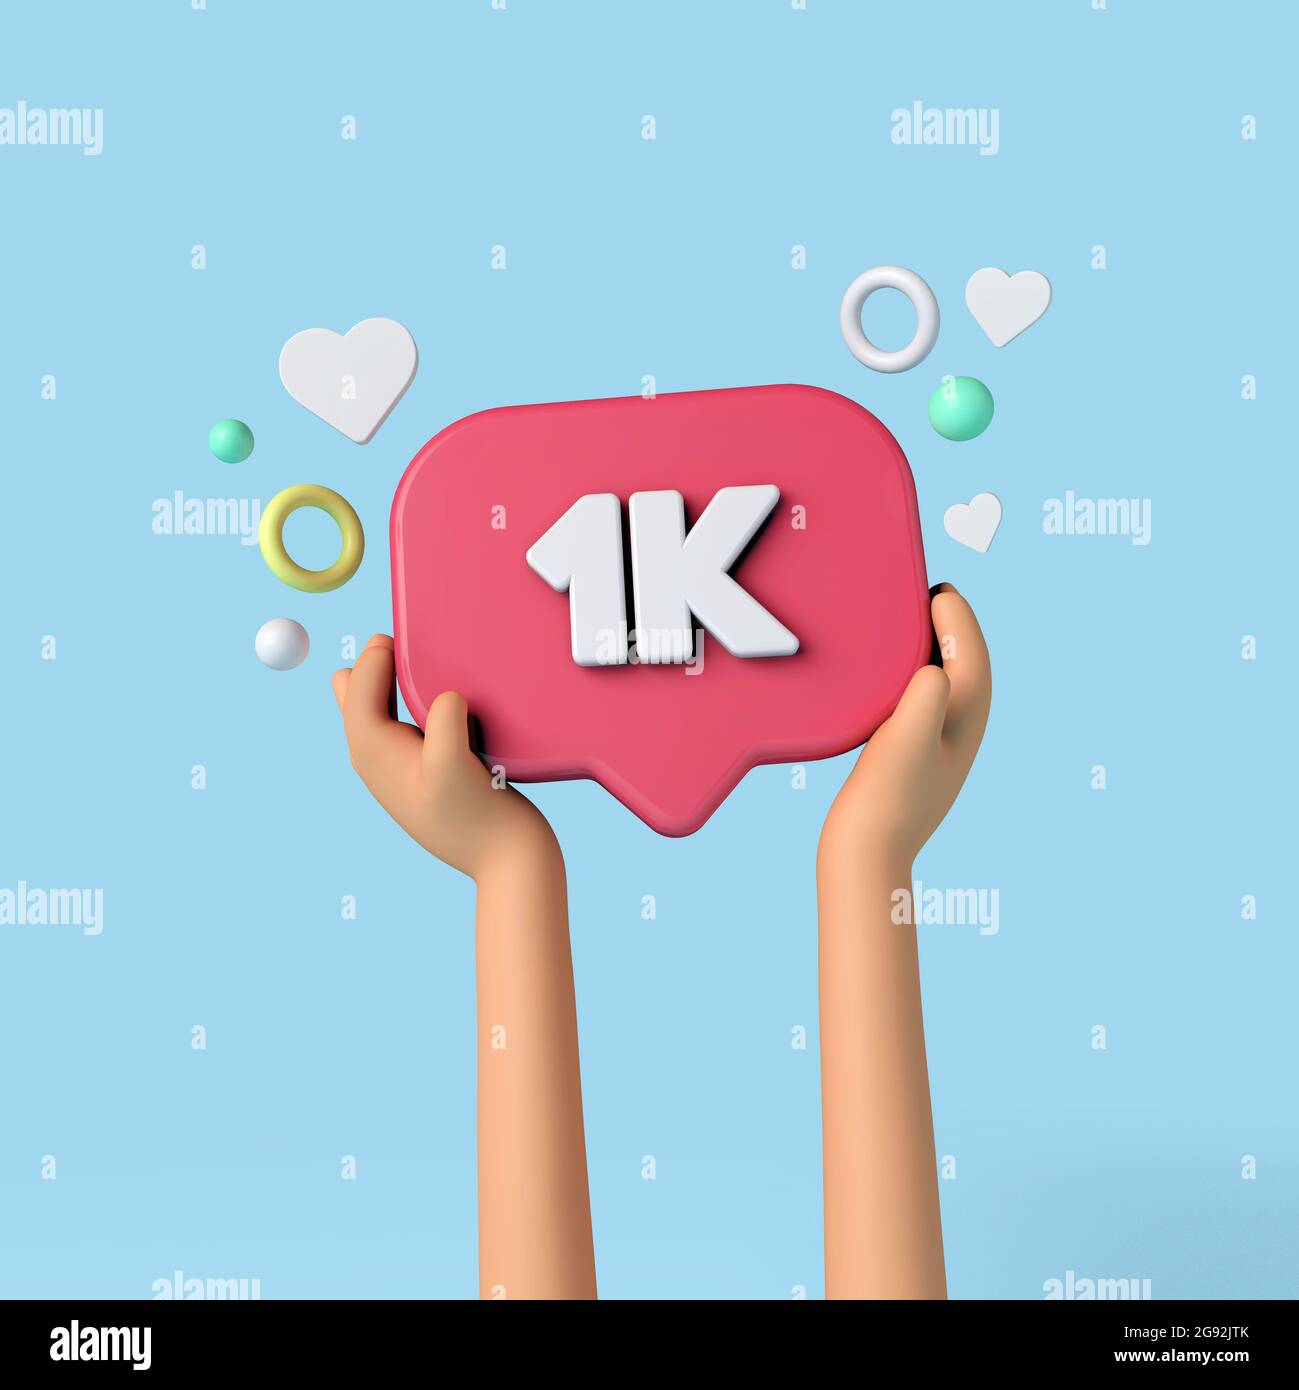 1k social media subscribers sign held by an influencer. 3D Rendering. Stock Photo